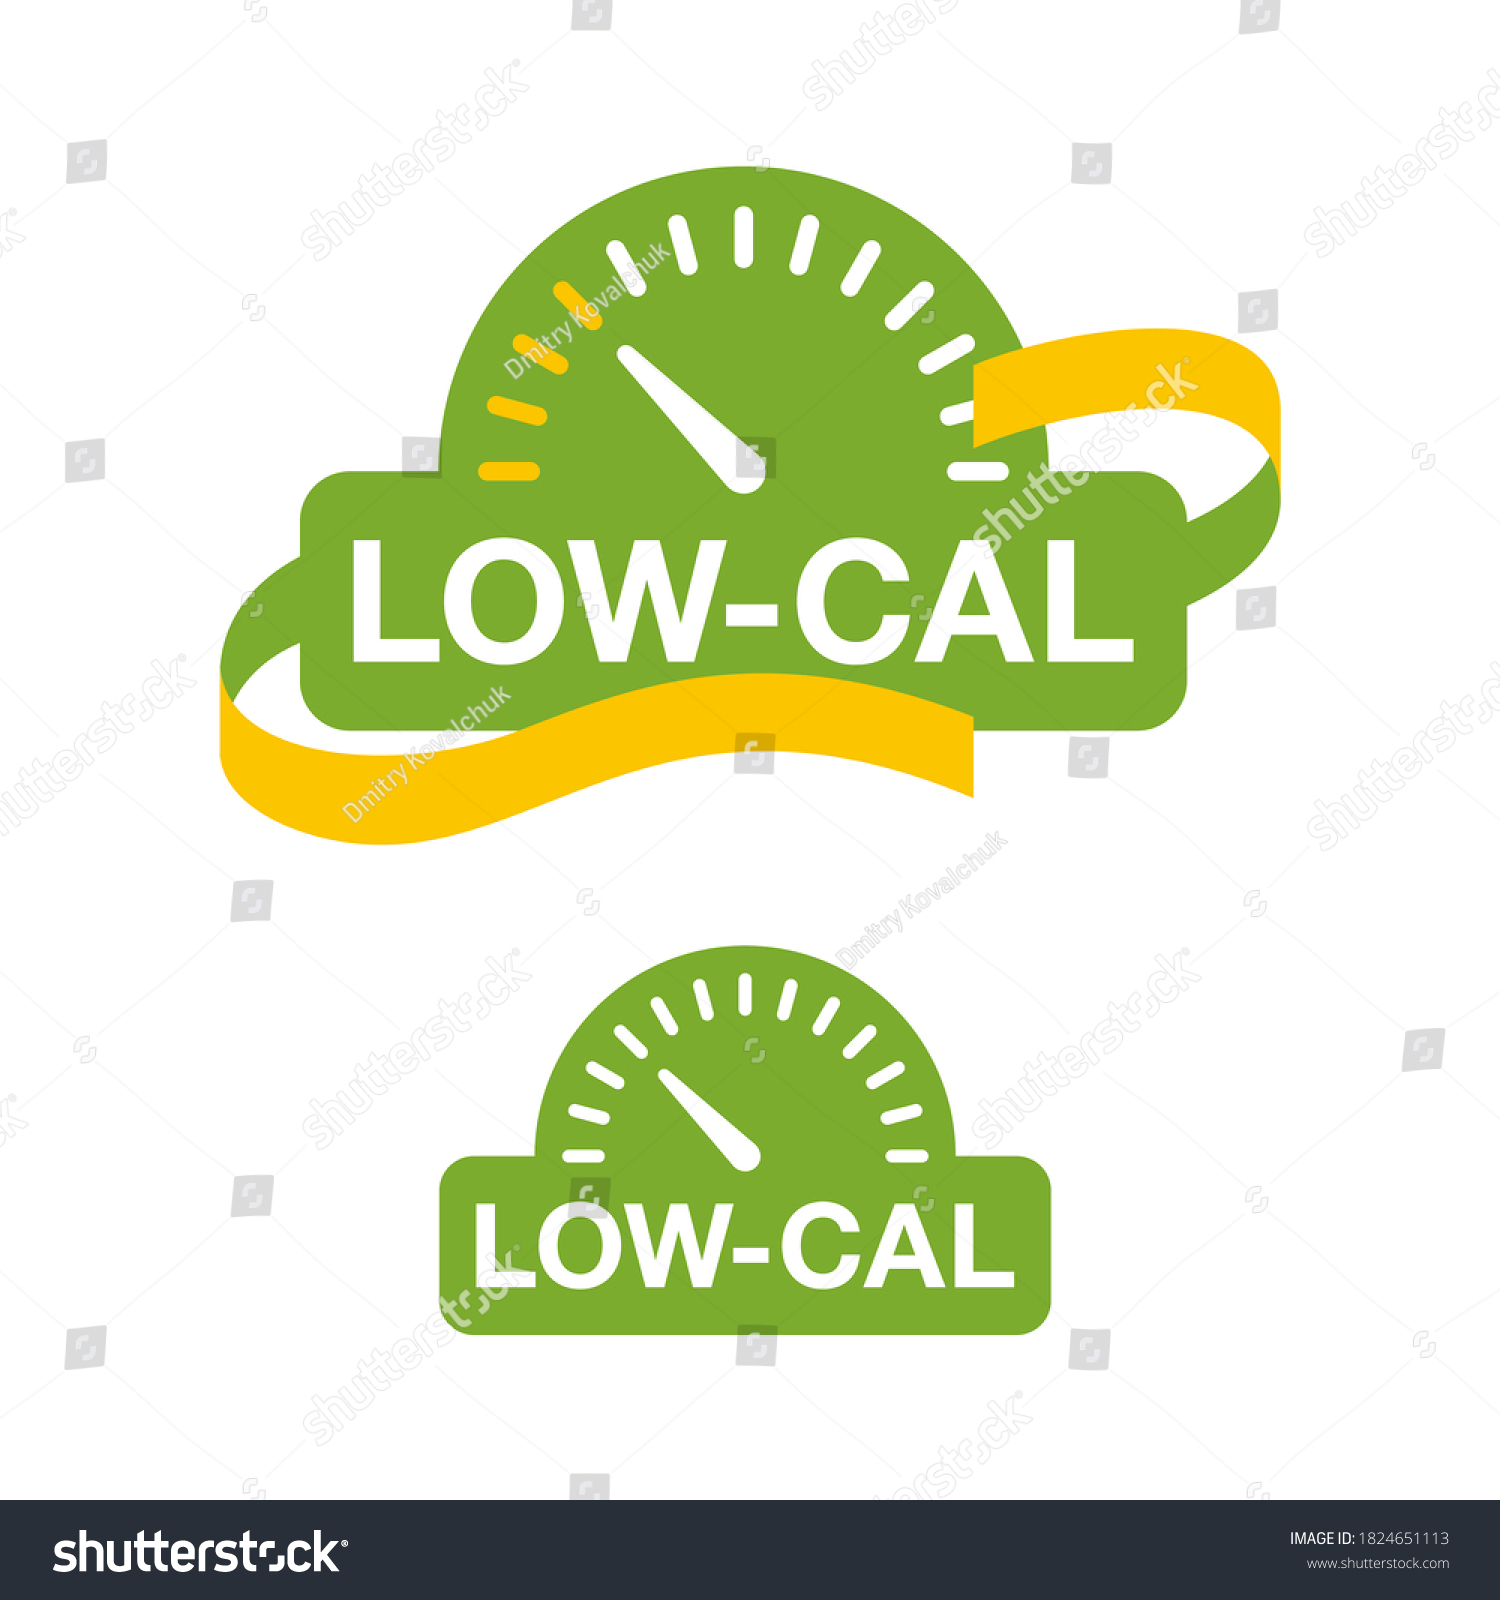 SVG of Low Cal icon - combination of measuring tape and weight scales - pictogram for dietary low-cal food products - isolated vector emblem svg